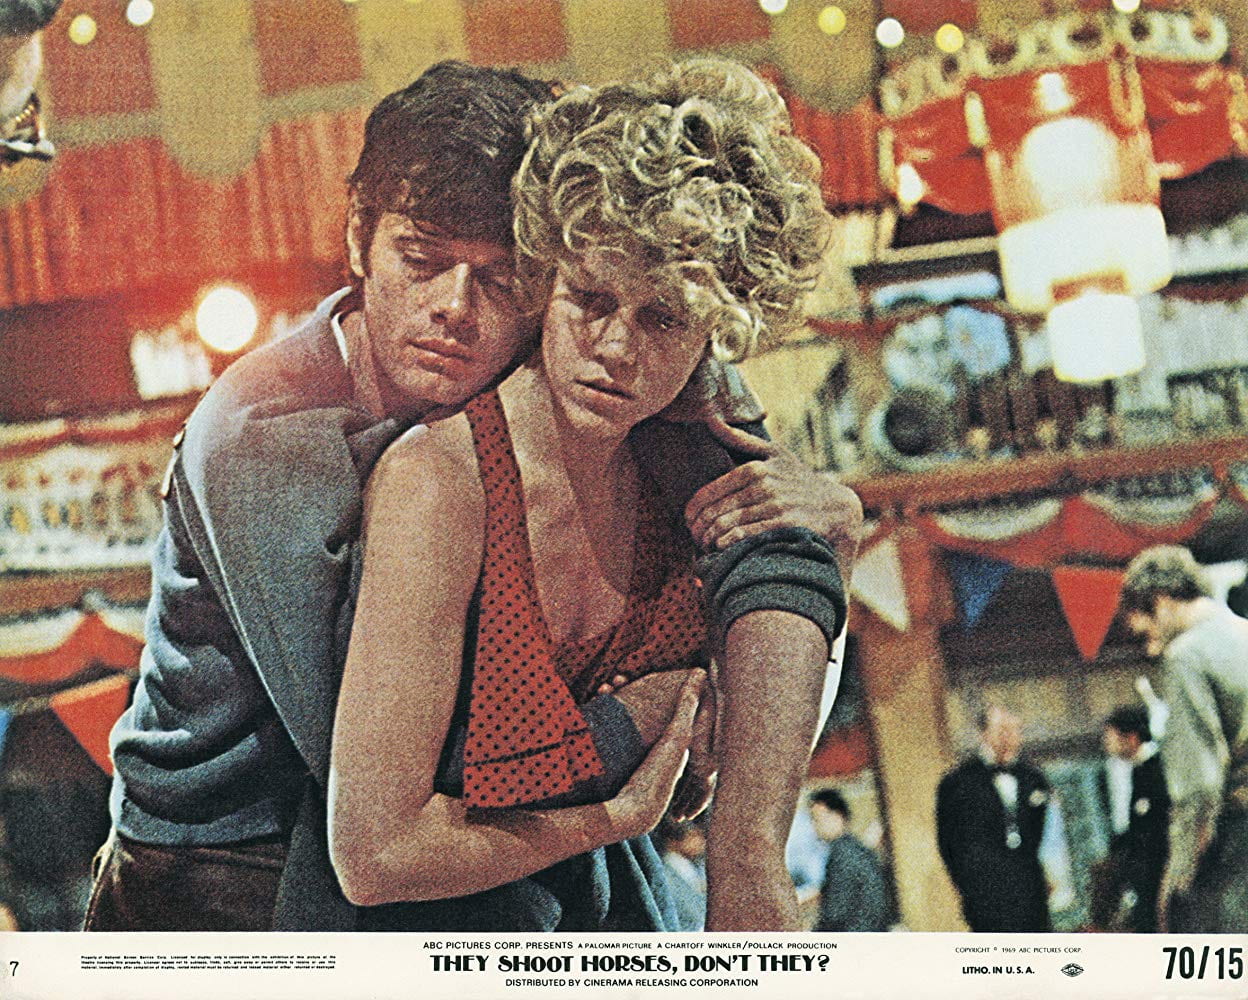 A lobby card showing an exhausted man clinging to a woman's back as she props him up